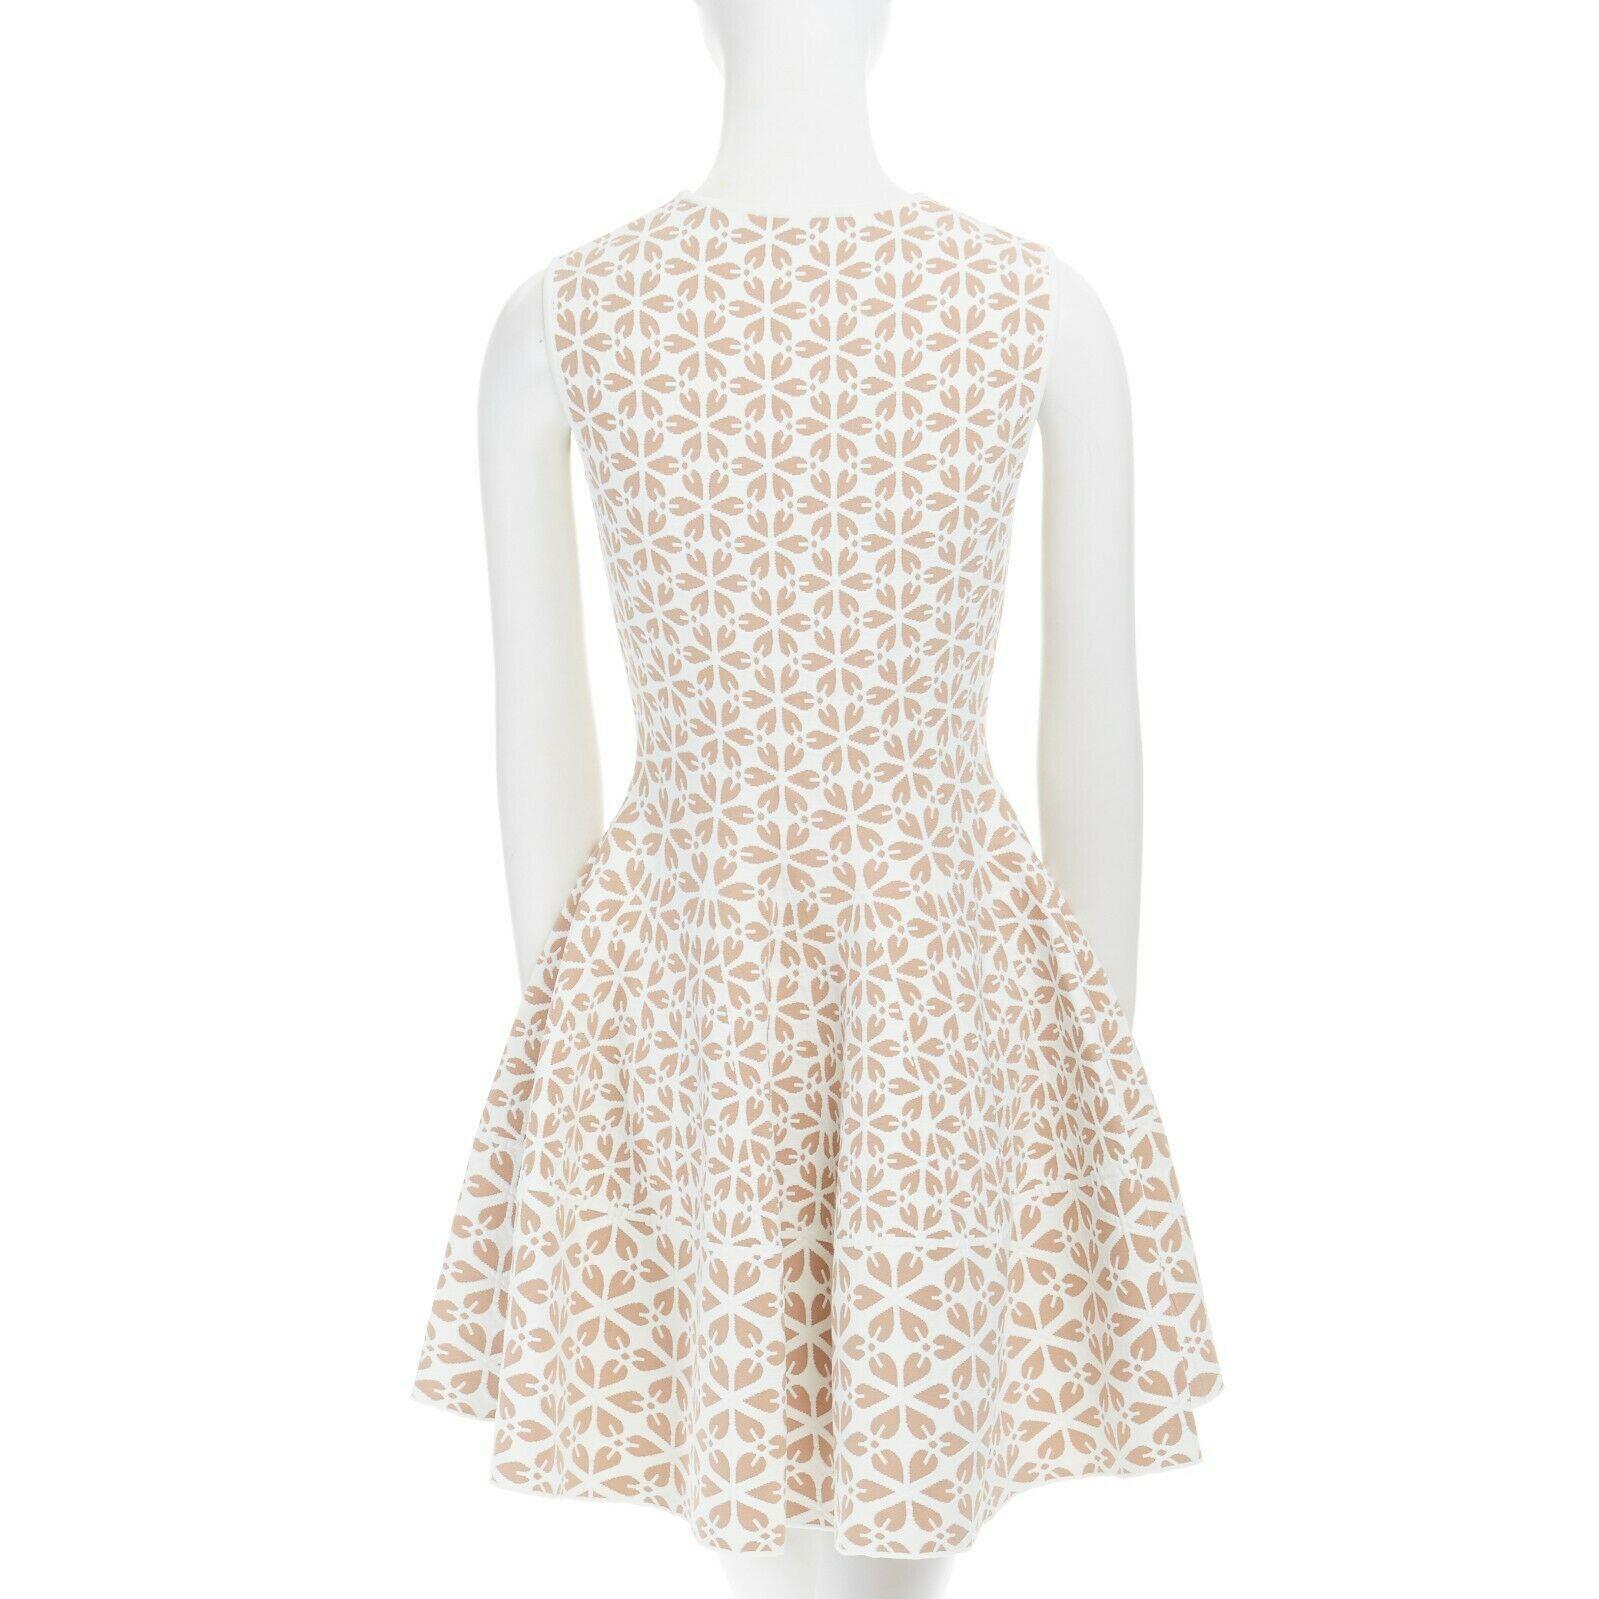 ALEXANDER MCQUEEN white nude geomtric leaf pattern jacquard fit flare dress M

ALEXANDER MCQUEEN
Viscose, polyester. White and nude jacquard. Geometric leaf pattern. Round neck. Sleeveless. Fit and flare. Stretch fit. Cocktail dress. Made in